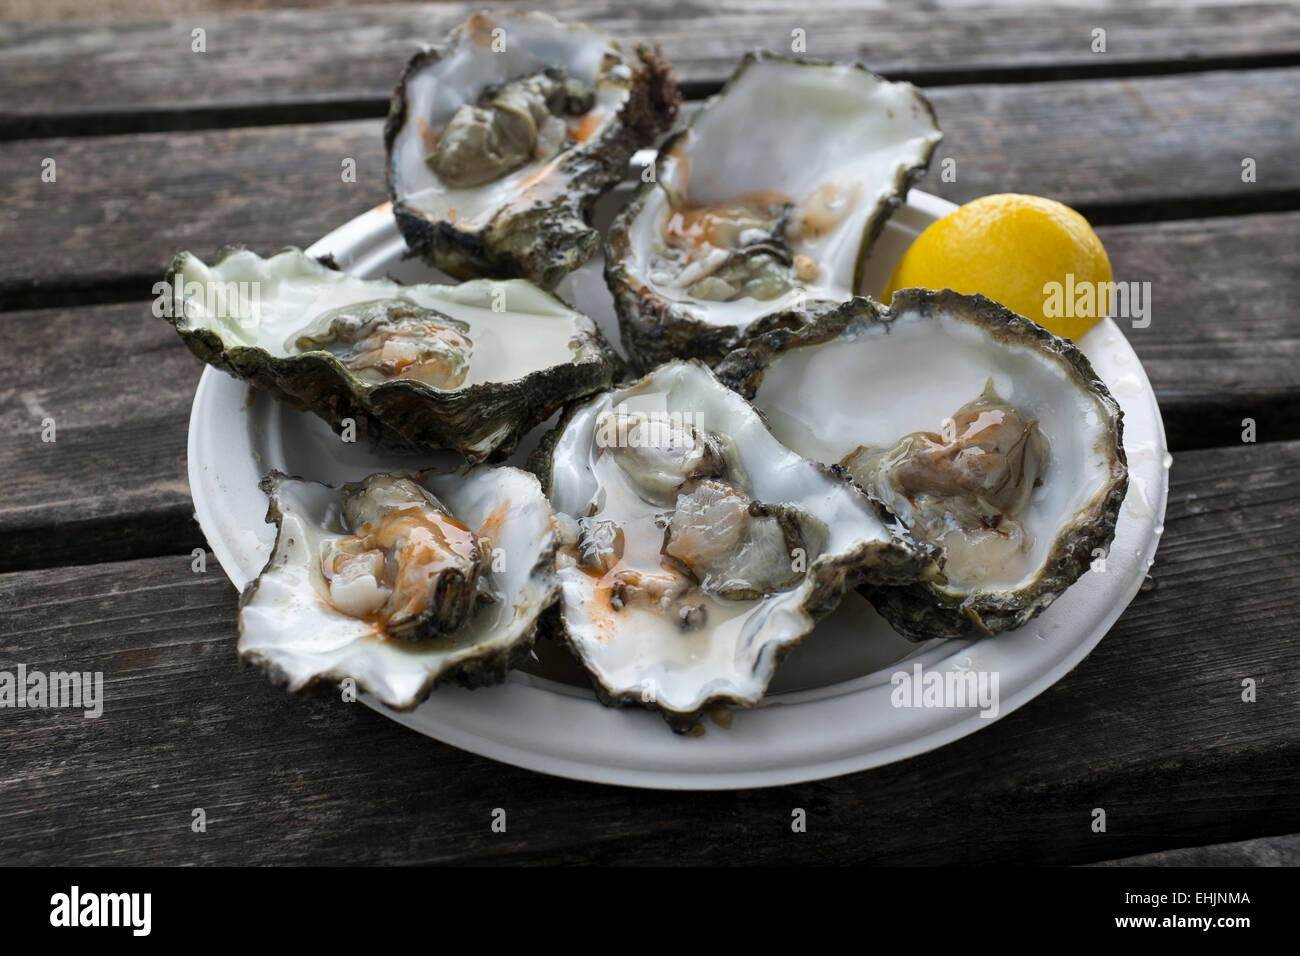 Plate of Half Dozen Oysters with Lemon Stock Photo